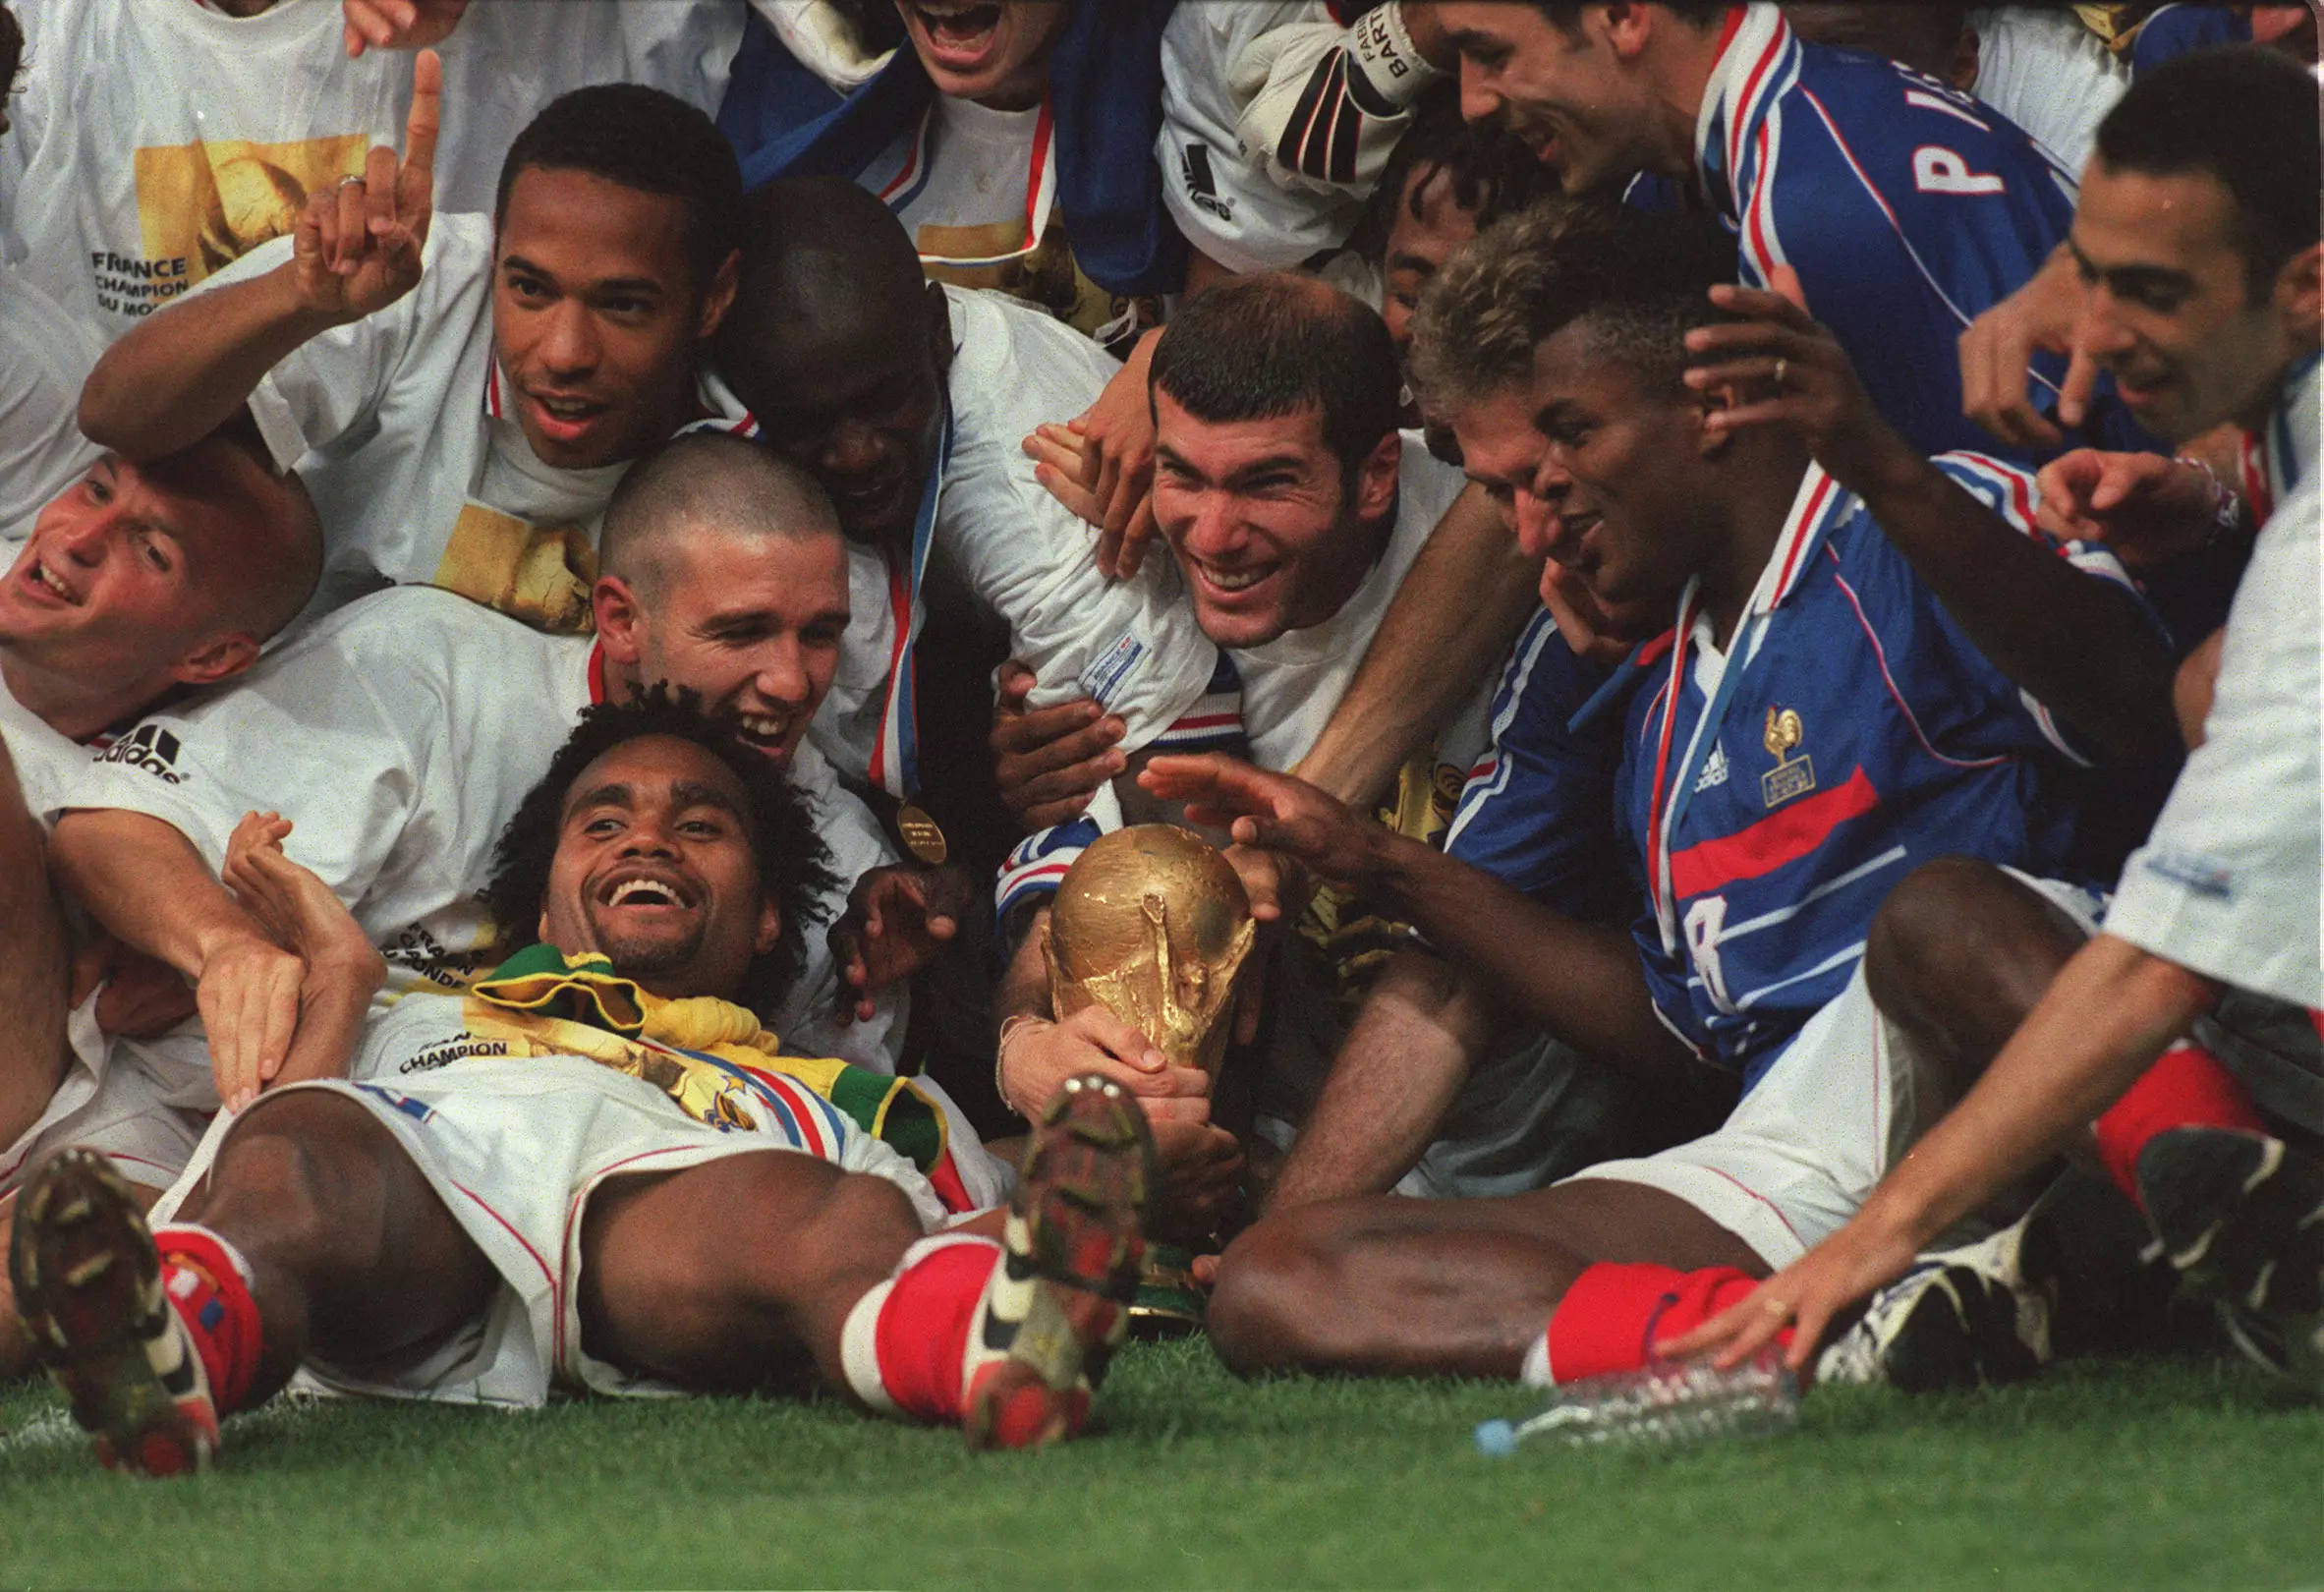 France won the 1998 World Cup on home soil in a memorable tournament. Image: PA